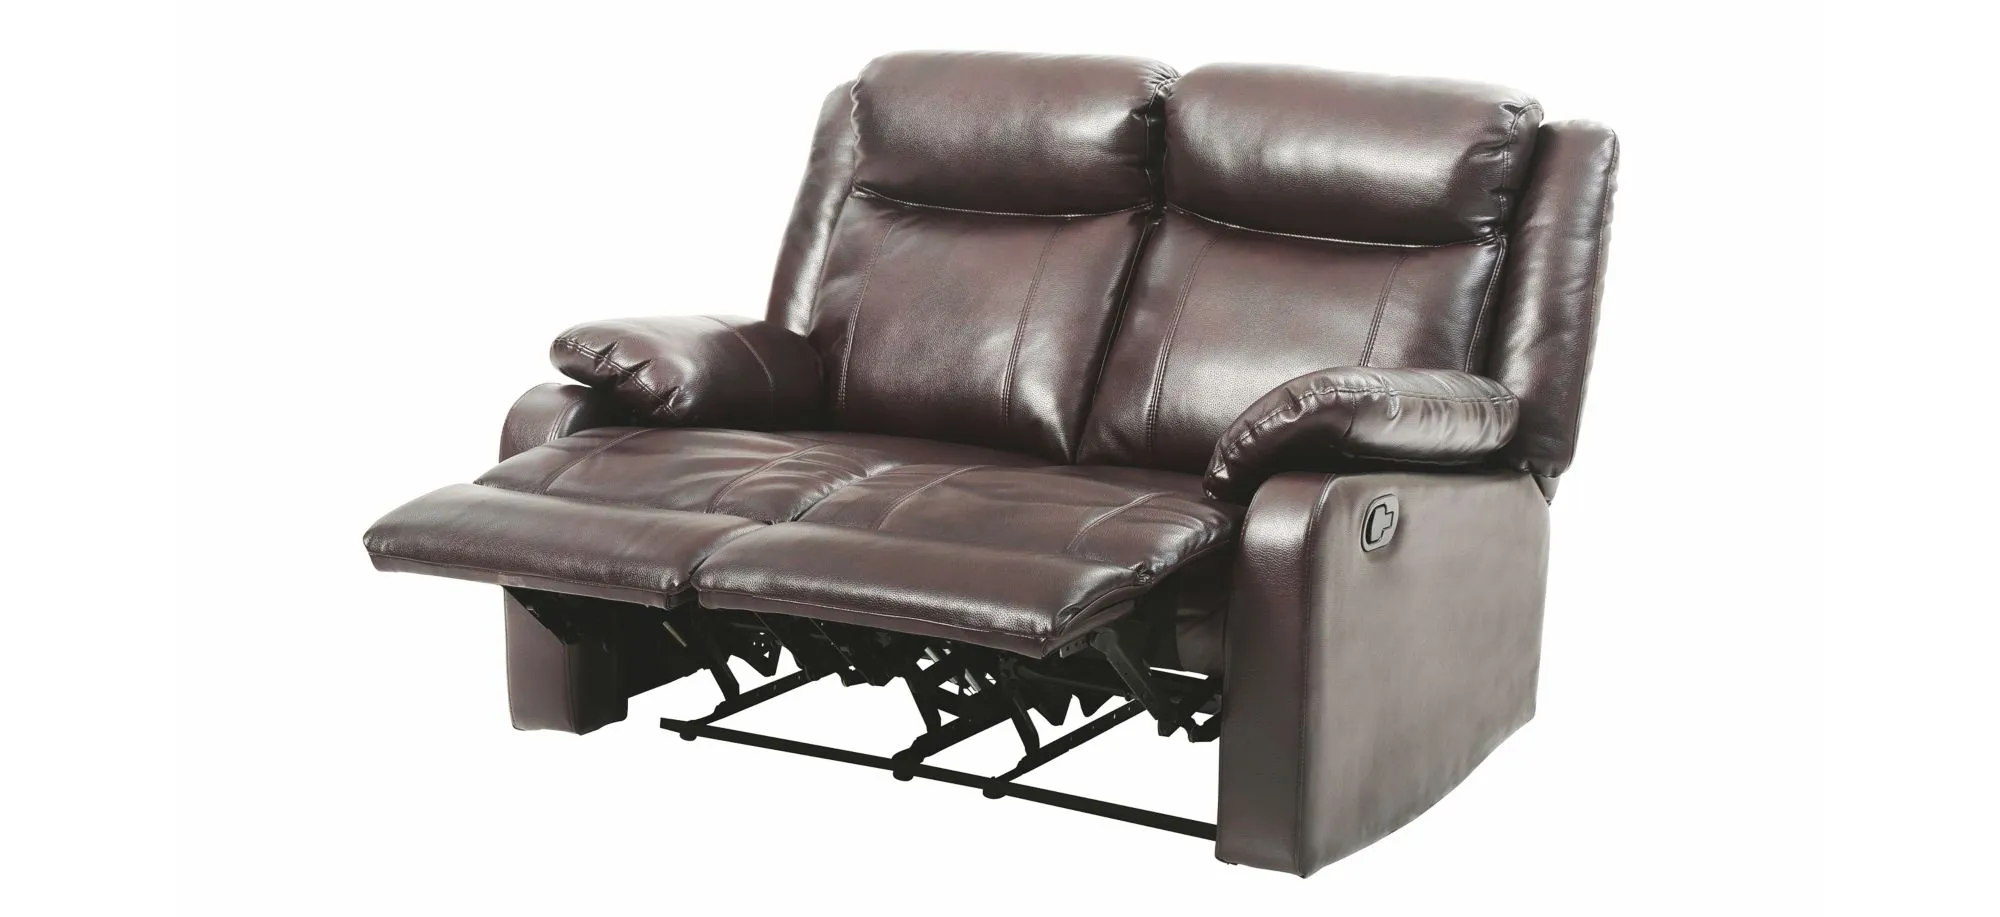 Ward Double Reclining Loveseat in Dark Brown by Glory Furniture